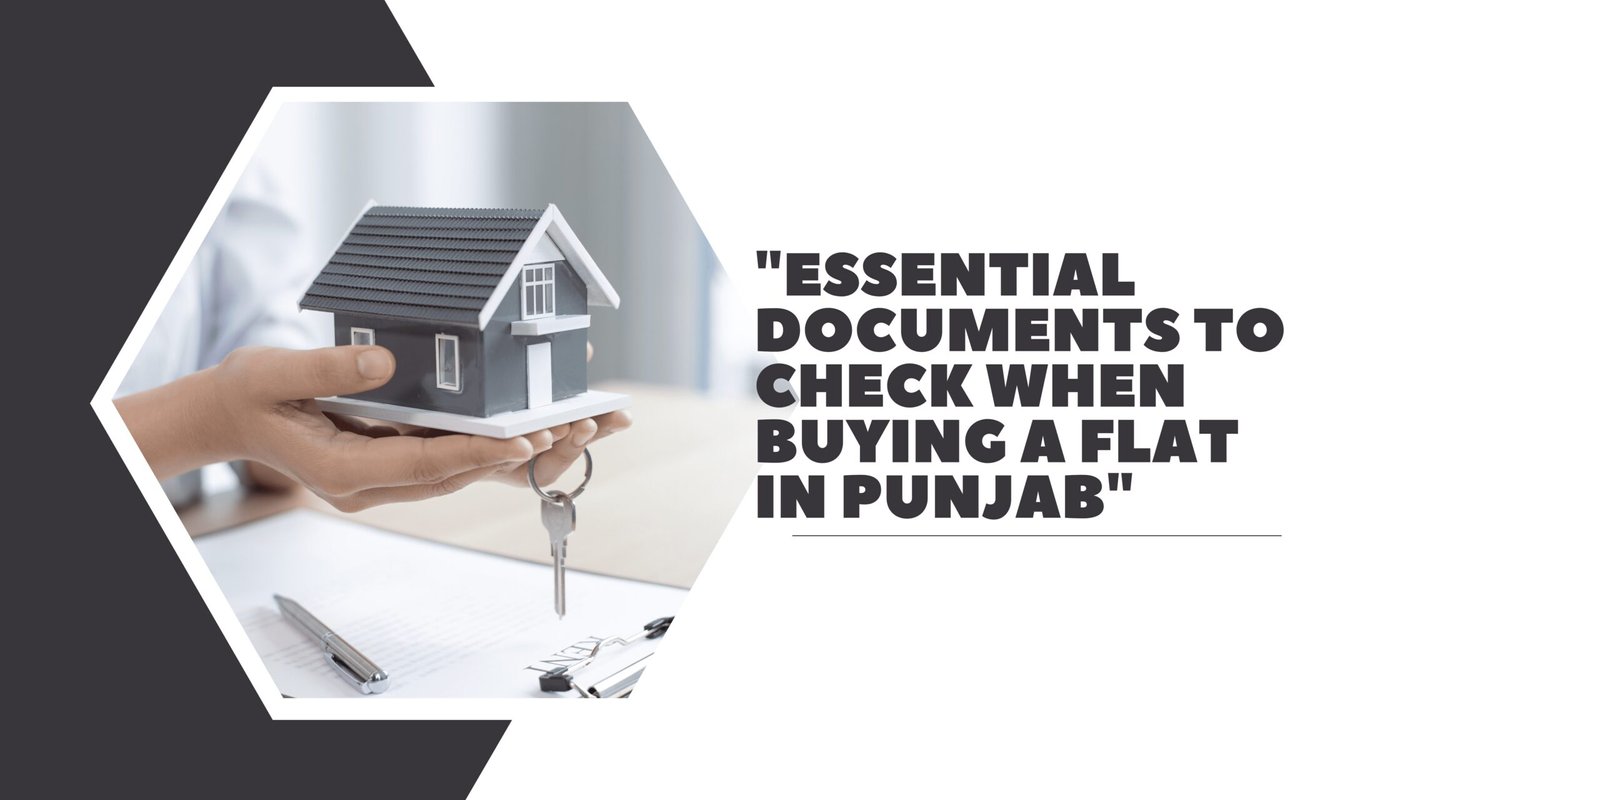 Essential Documents to Check When Buying a Flat in Punjab